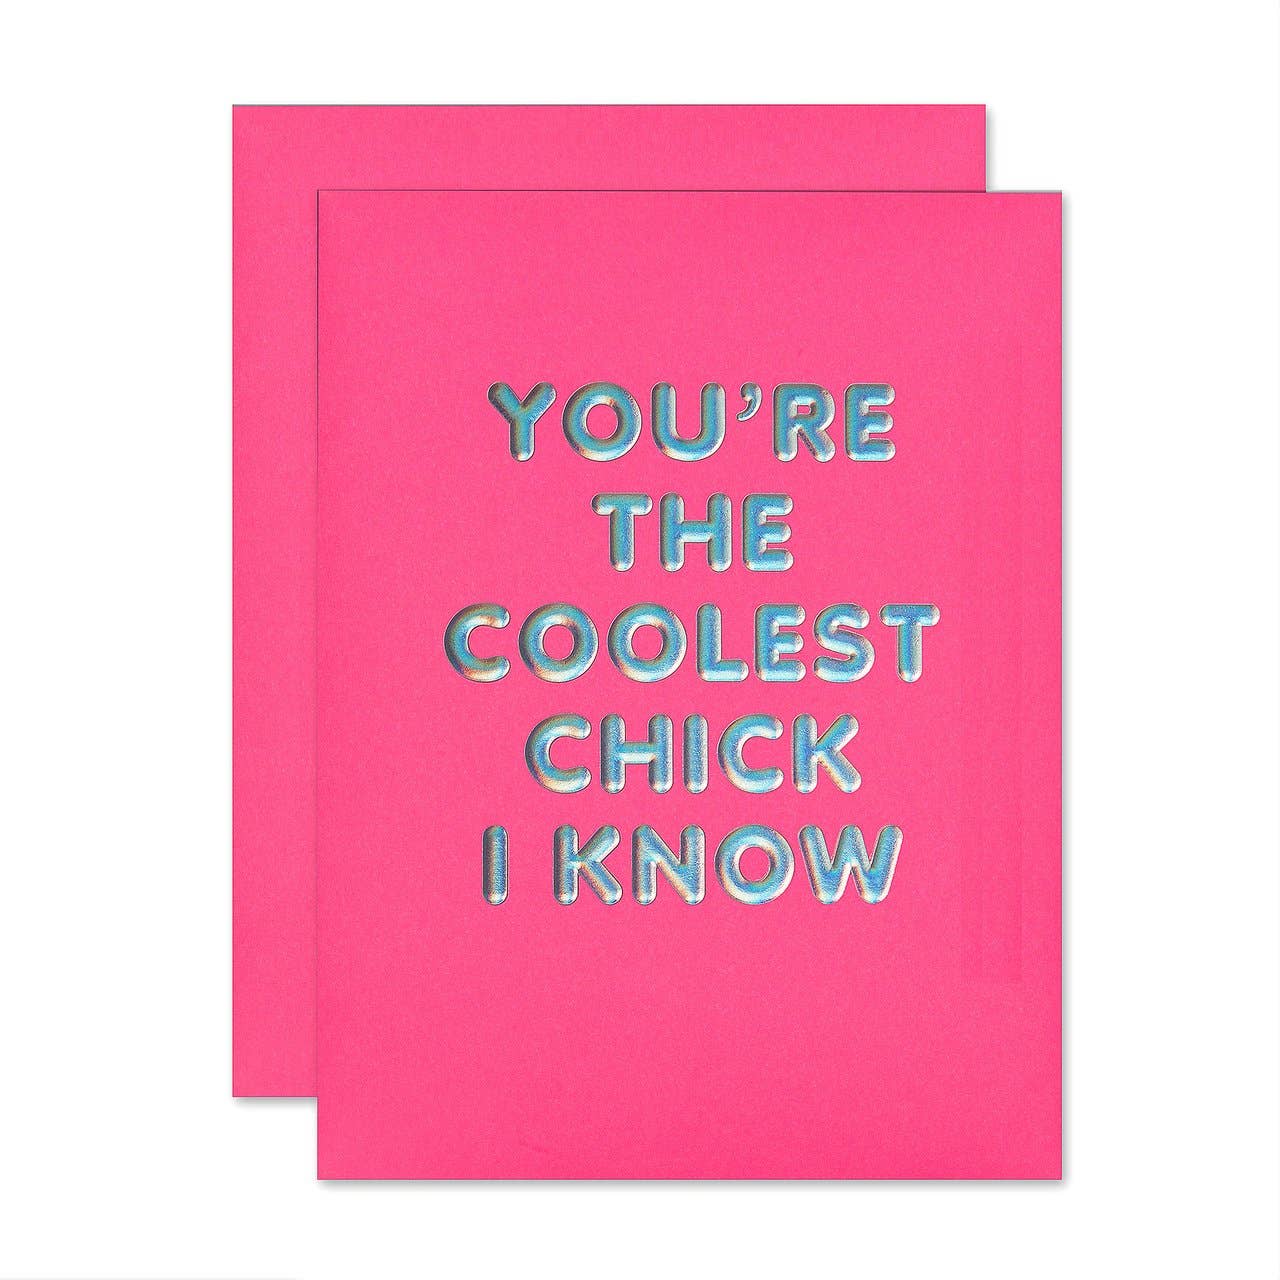 The Social Type Coolest Chick Friendship Card